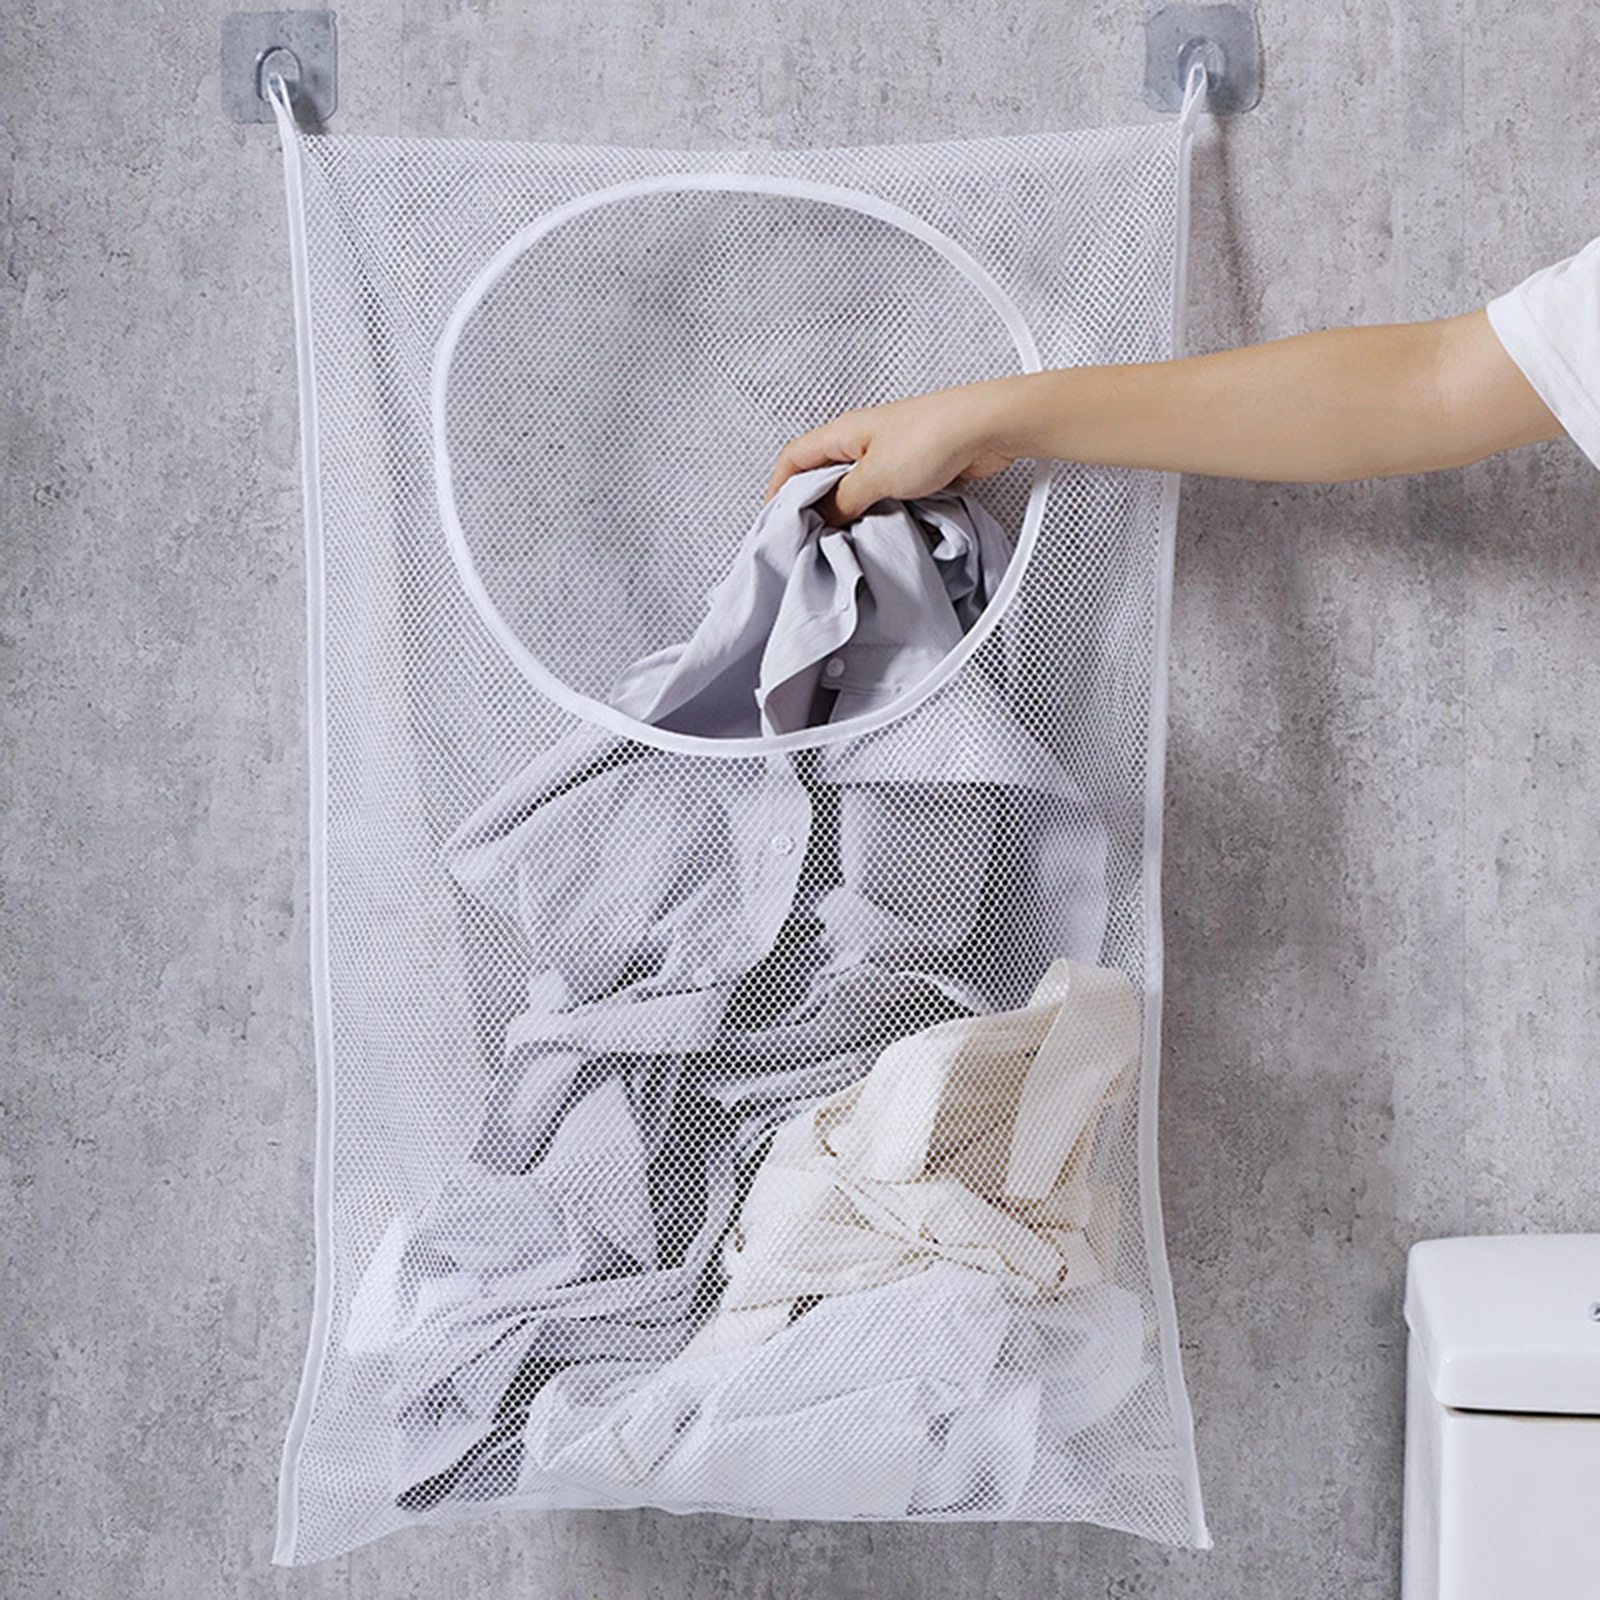 

Door Hanging Laundry Bags For Dirty Clothes Washing Machines Wall Mounted Bathroom Storage Bag Hanging Laundry Hamper New